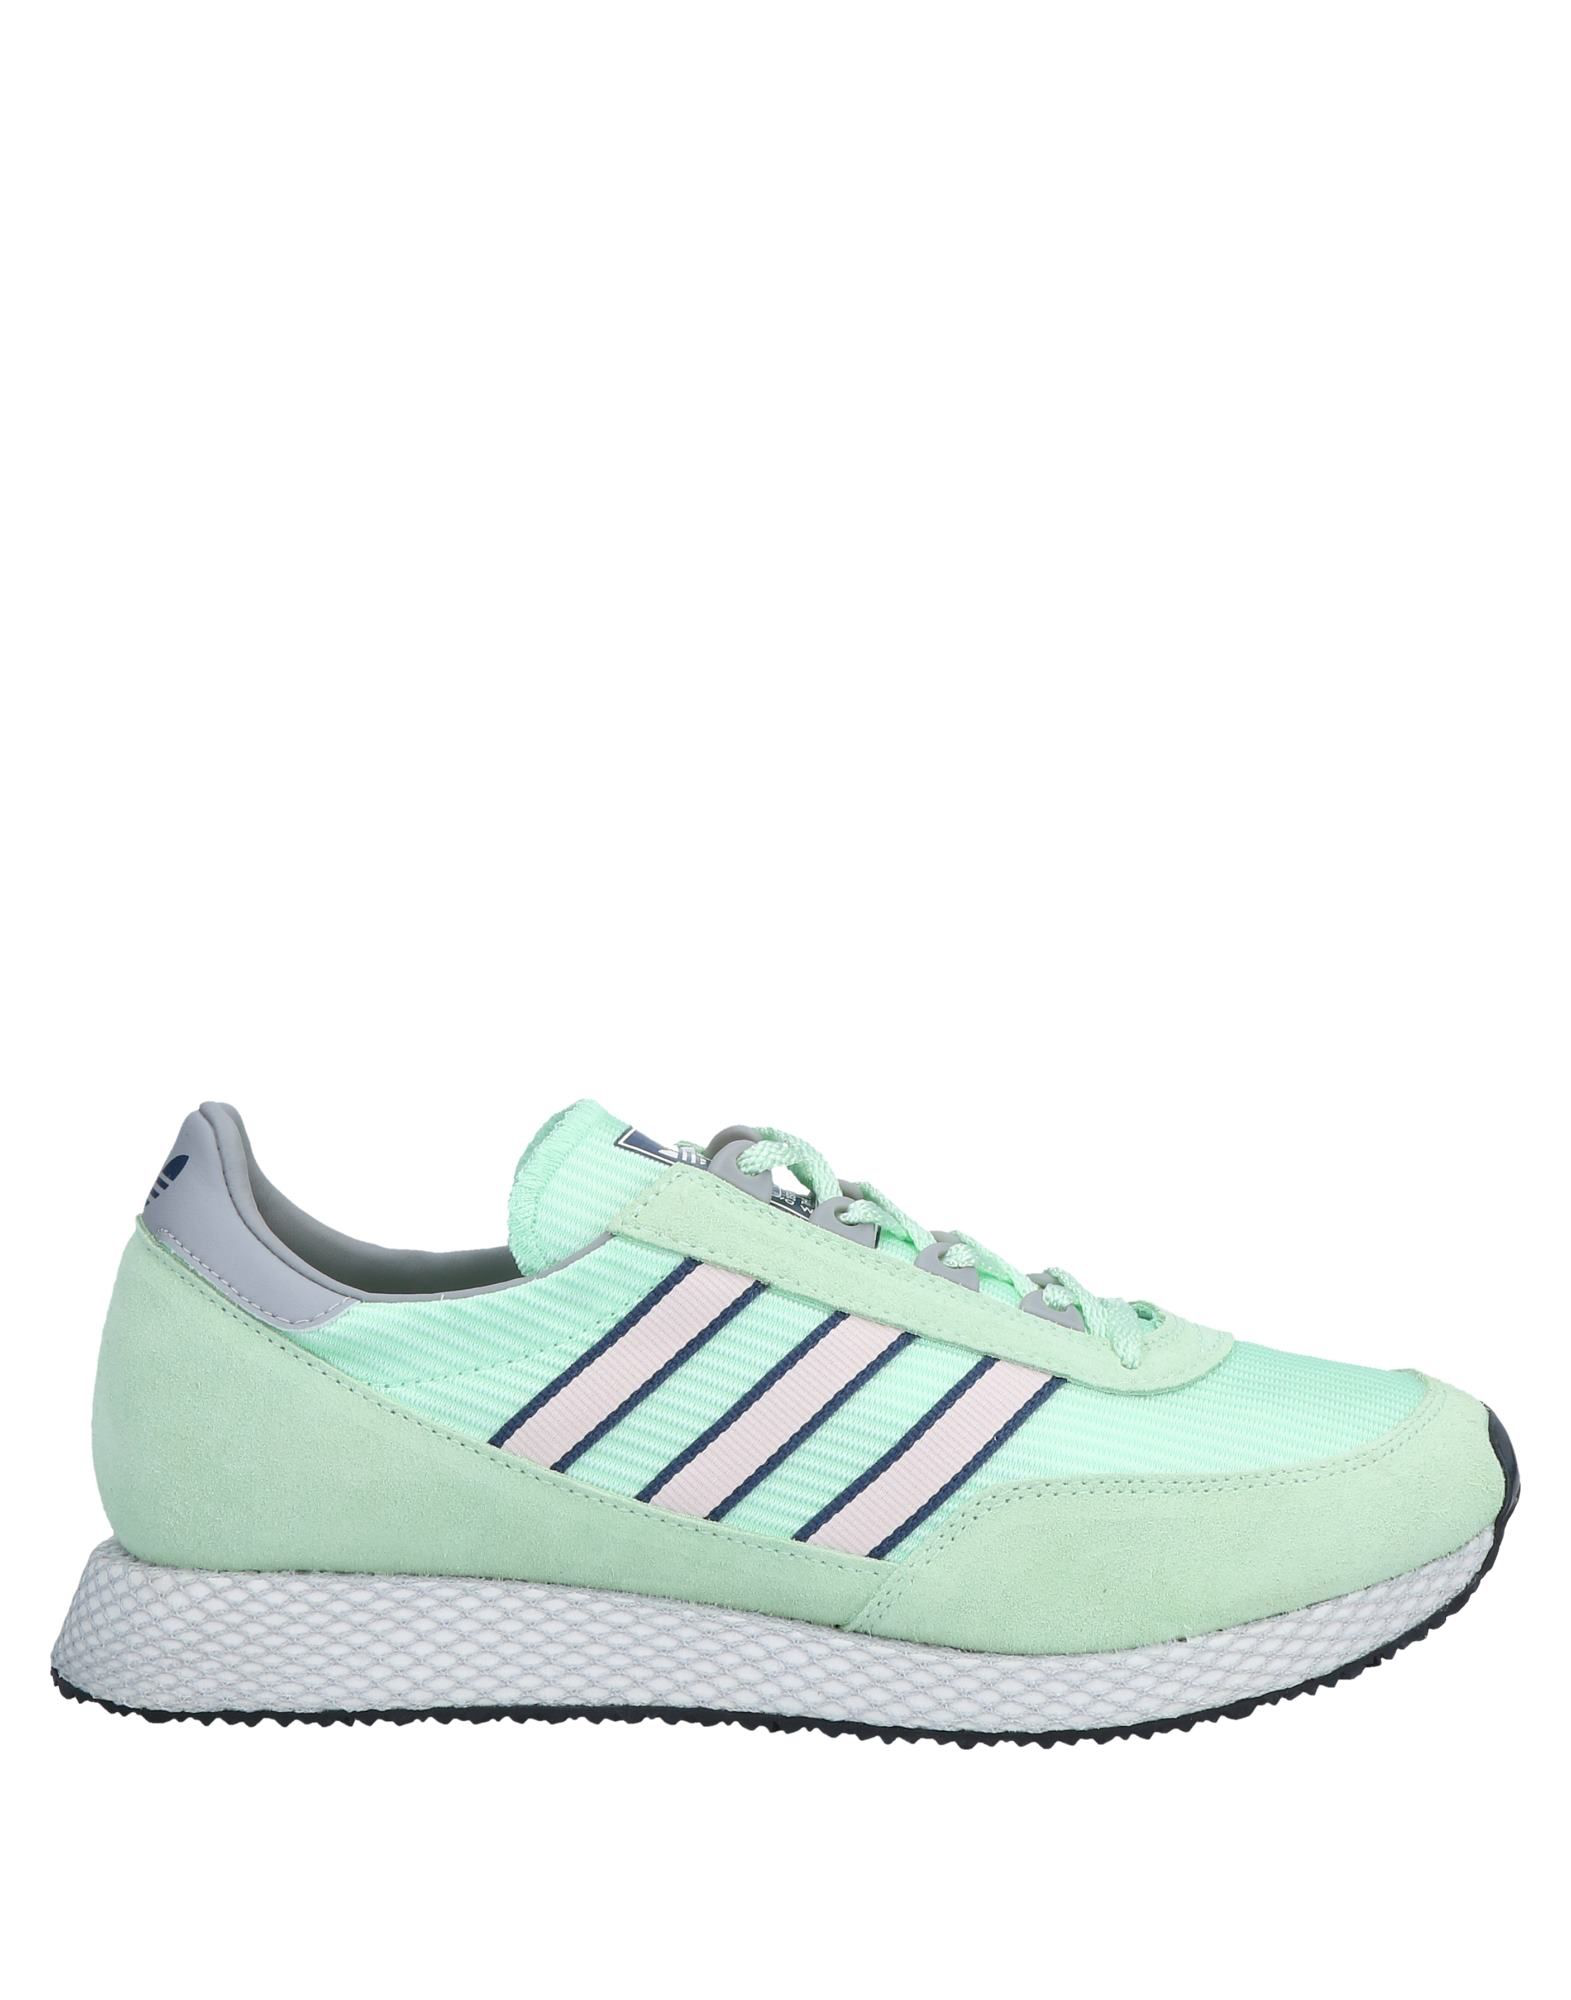 ADIDAS SPEZIAL Shoes On Sale, Up To 70% Off | ModeSens